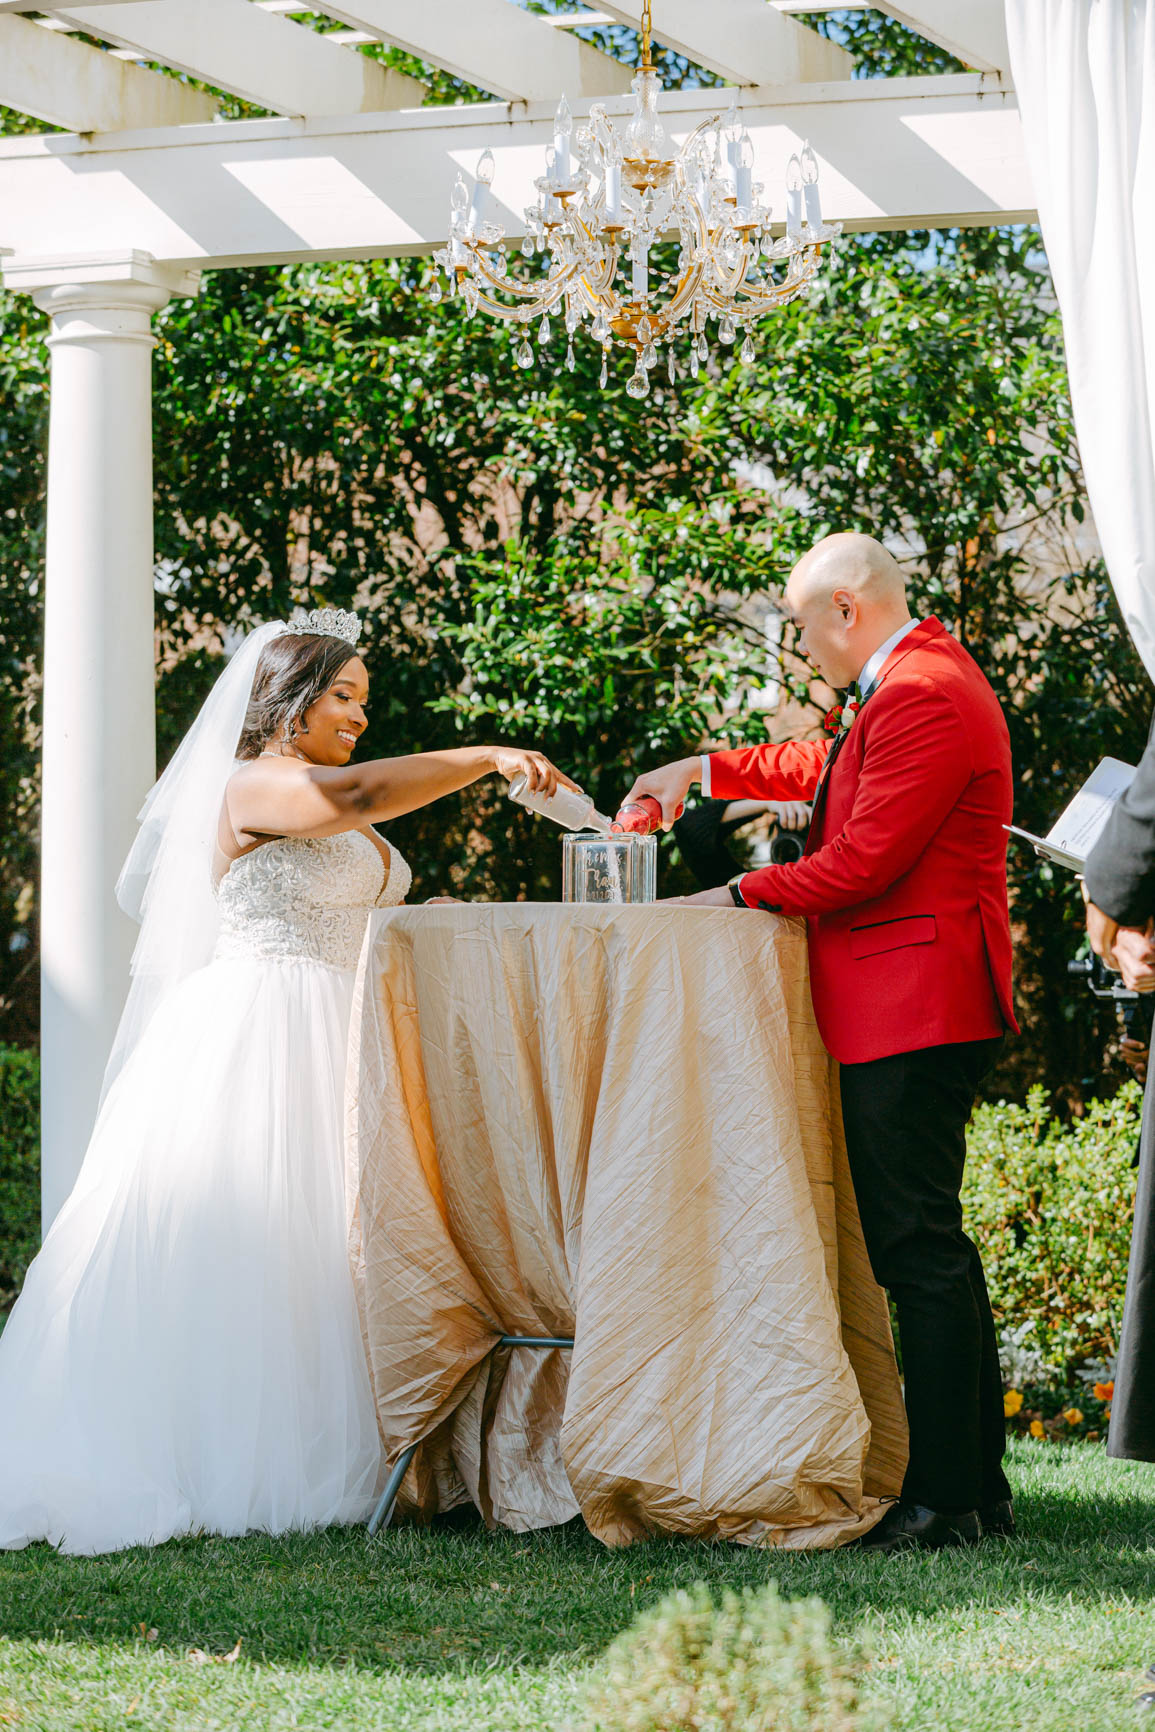 bride and groom pouring unity sand ceremony at Separk Mansion in Gastonia NC shot by Nhieu Tang Photography | nhieutang.com